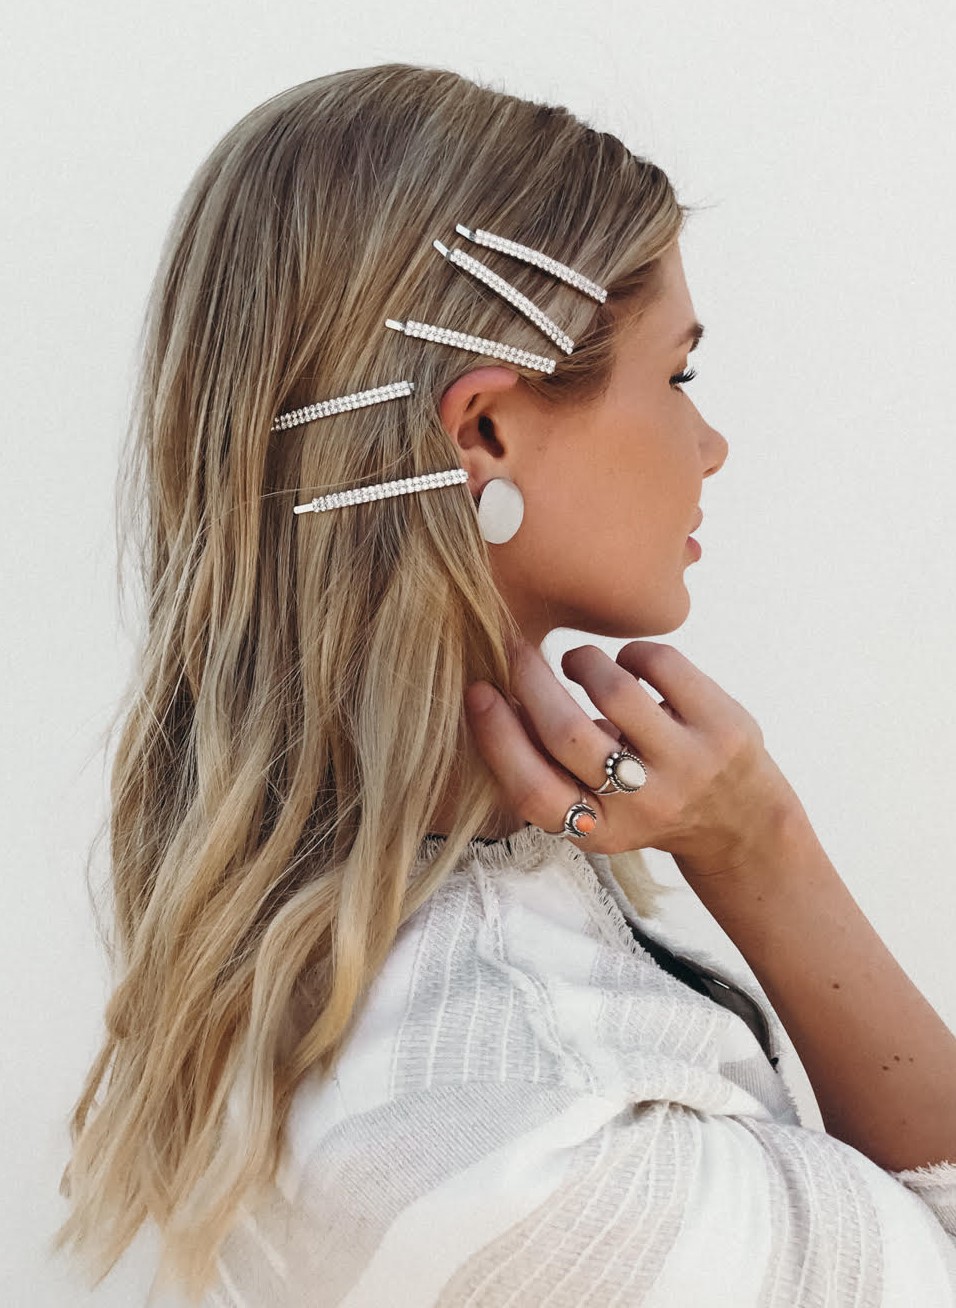 The Ultimate Guide to Barrettes | HOWTOWEAR Fashion